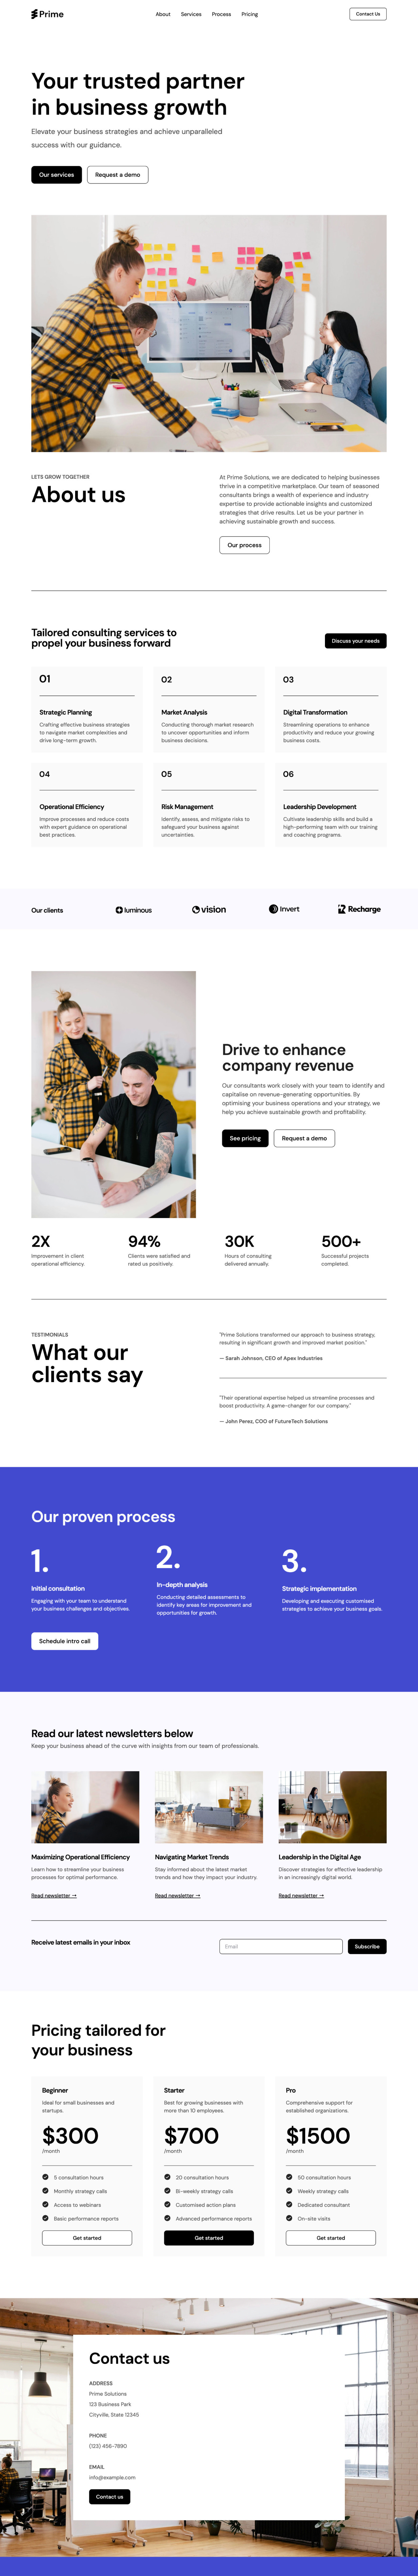 Consulting template - Made by MailerLite